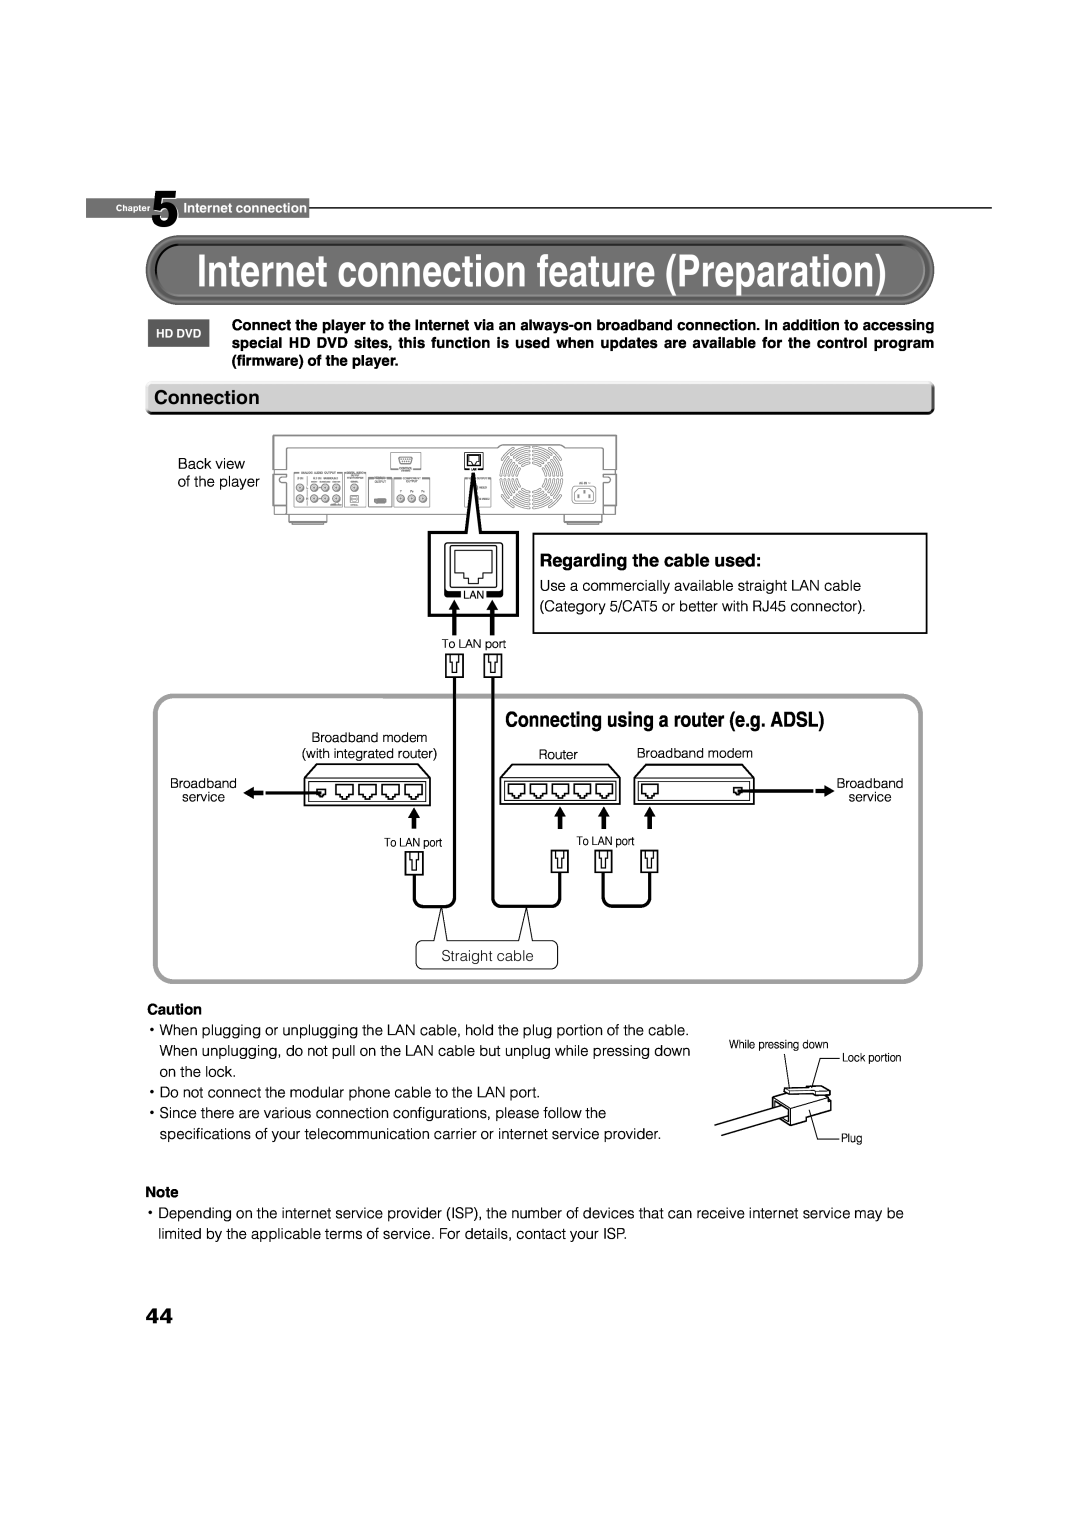 Toshiba HD-D1, HD-A1 owner manual Internet connection feature Preparation, Connecting using a router e.g. ADSL, Connection 